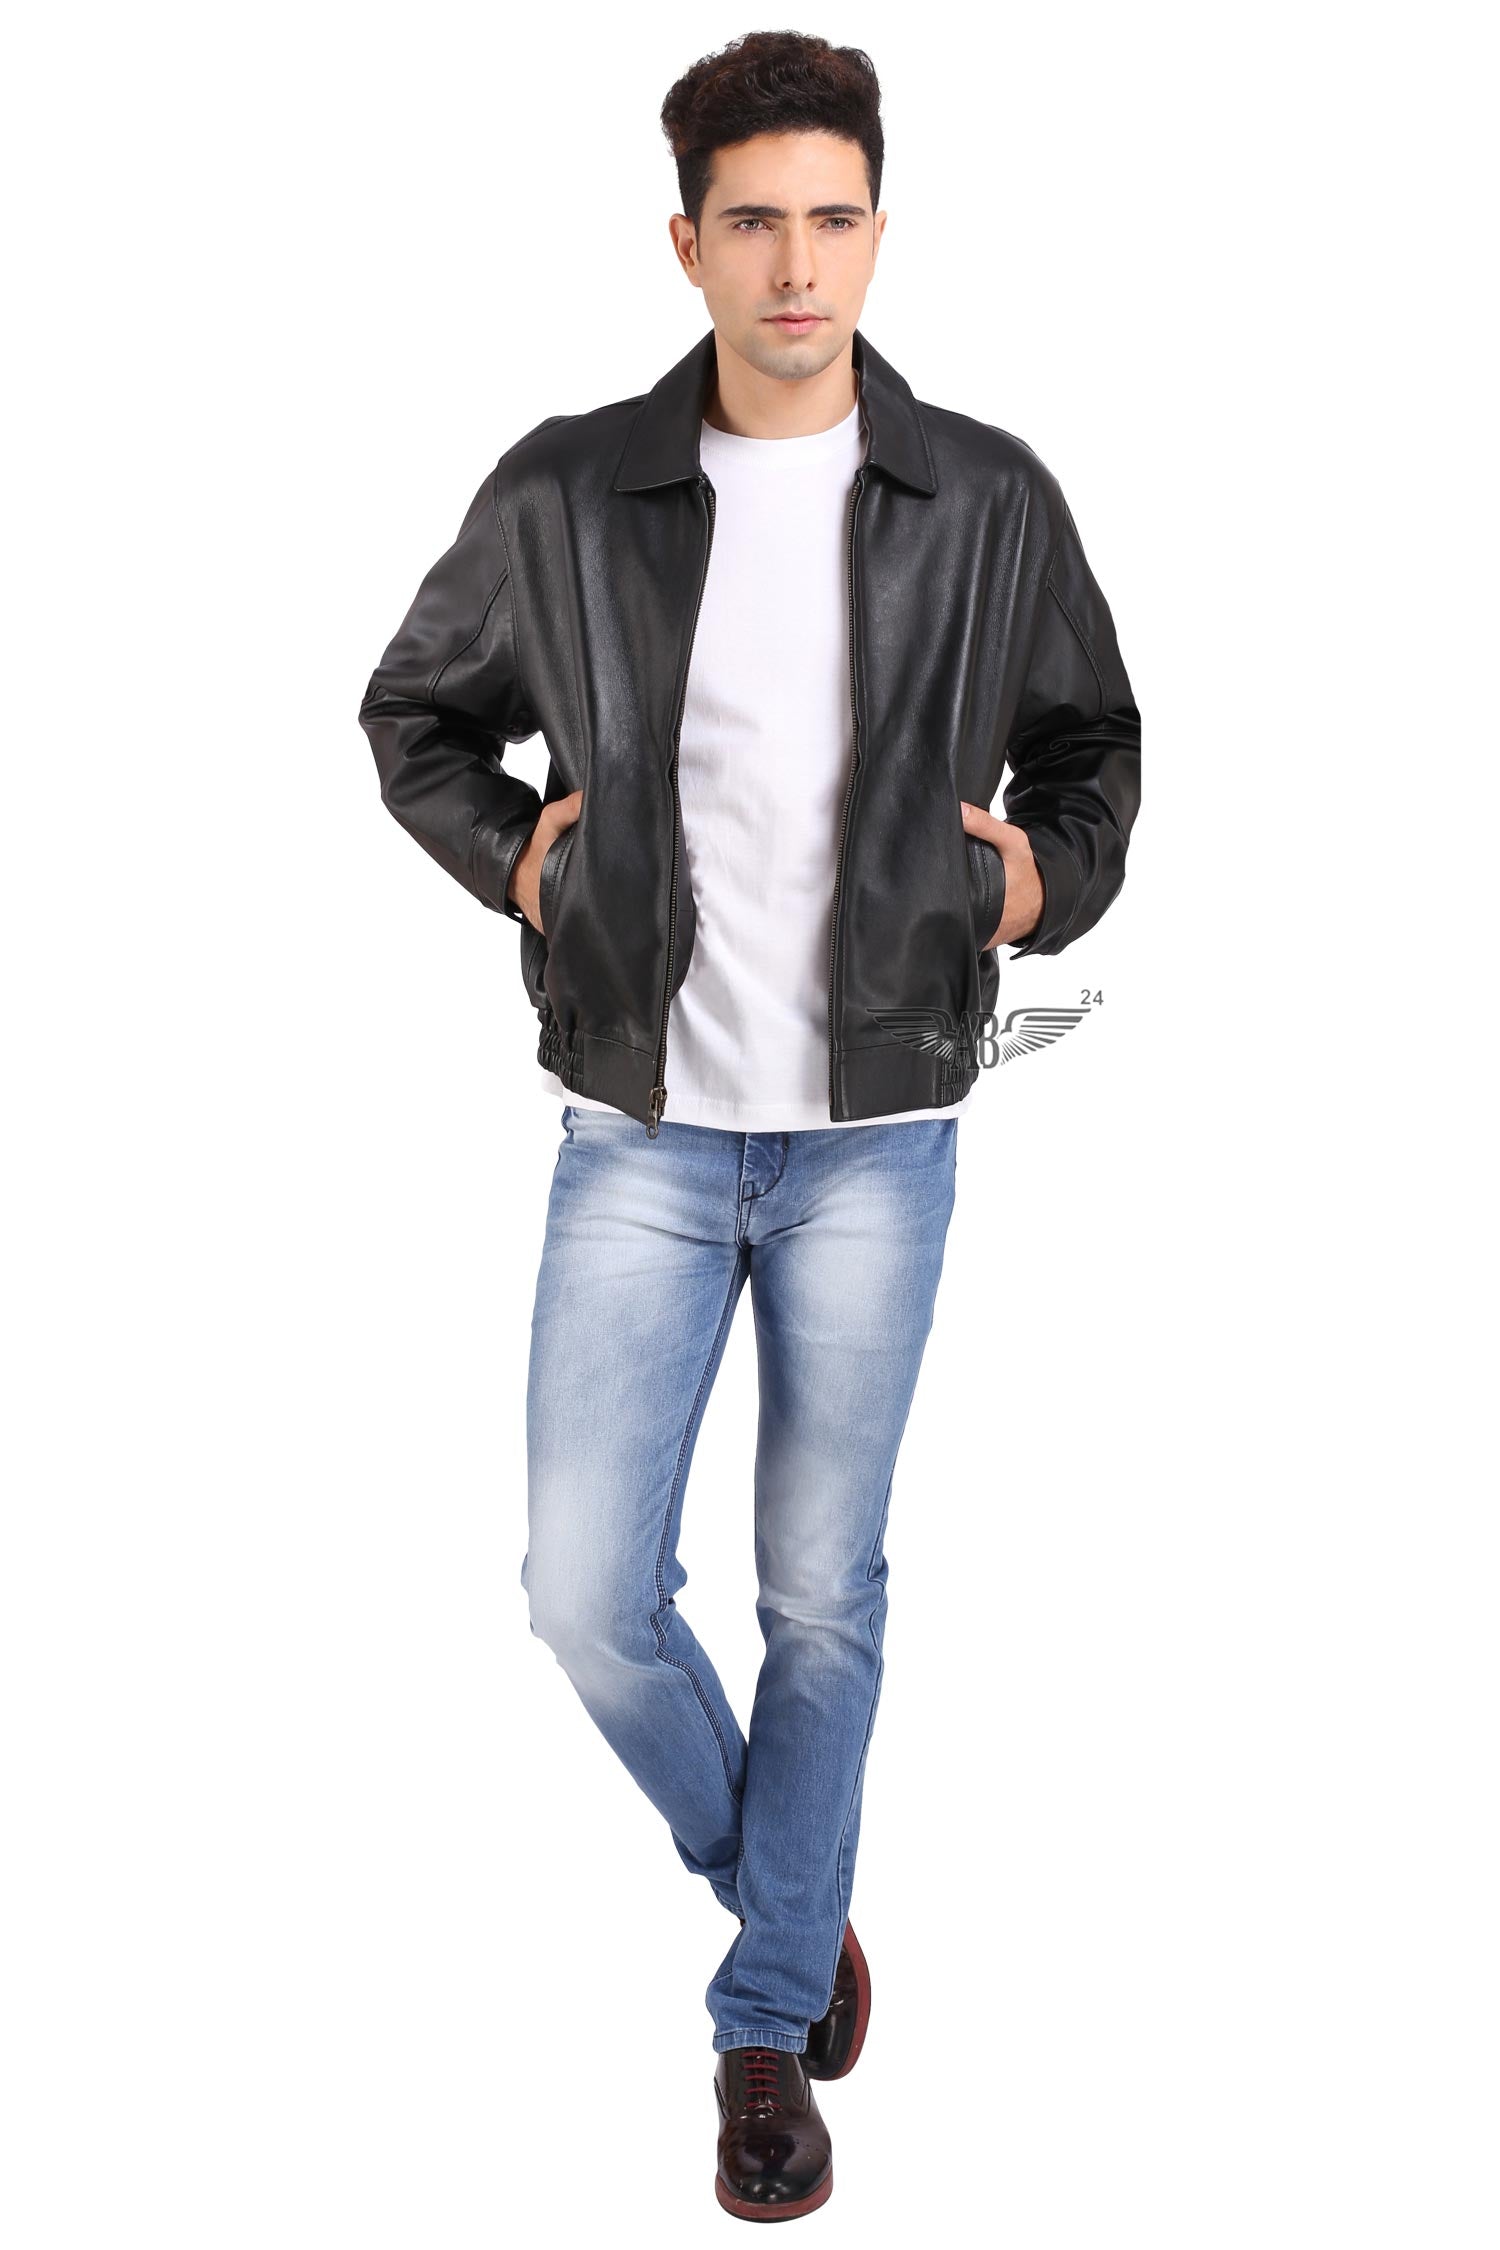 model posing for REAL PILOT BOMBER JACKET. He has tucked his hands inside slit pockets Jacket is unzipped